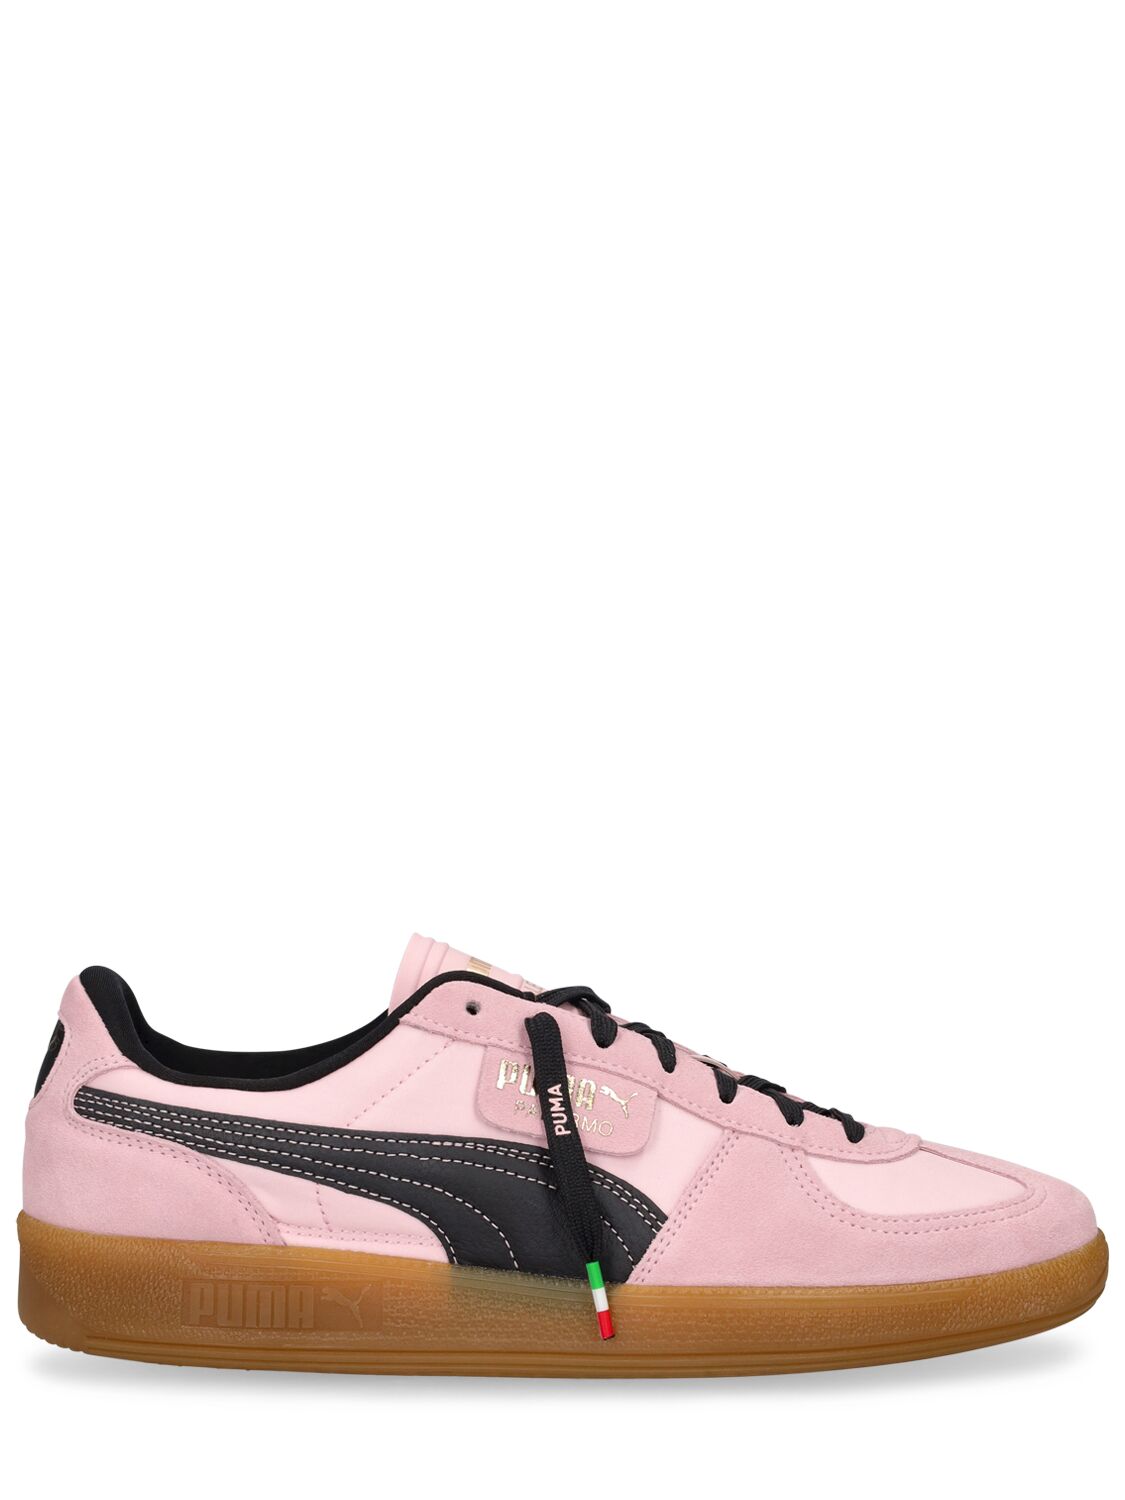 Image of Palermo F.c. Sneakers